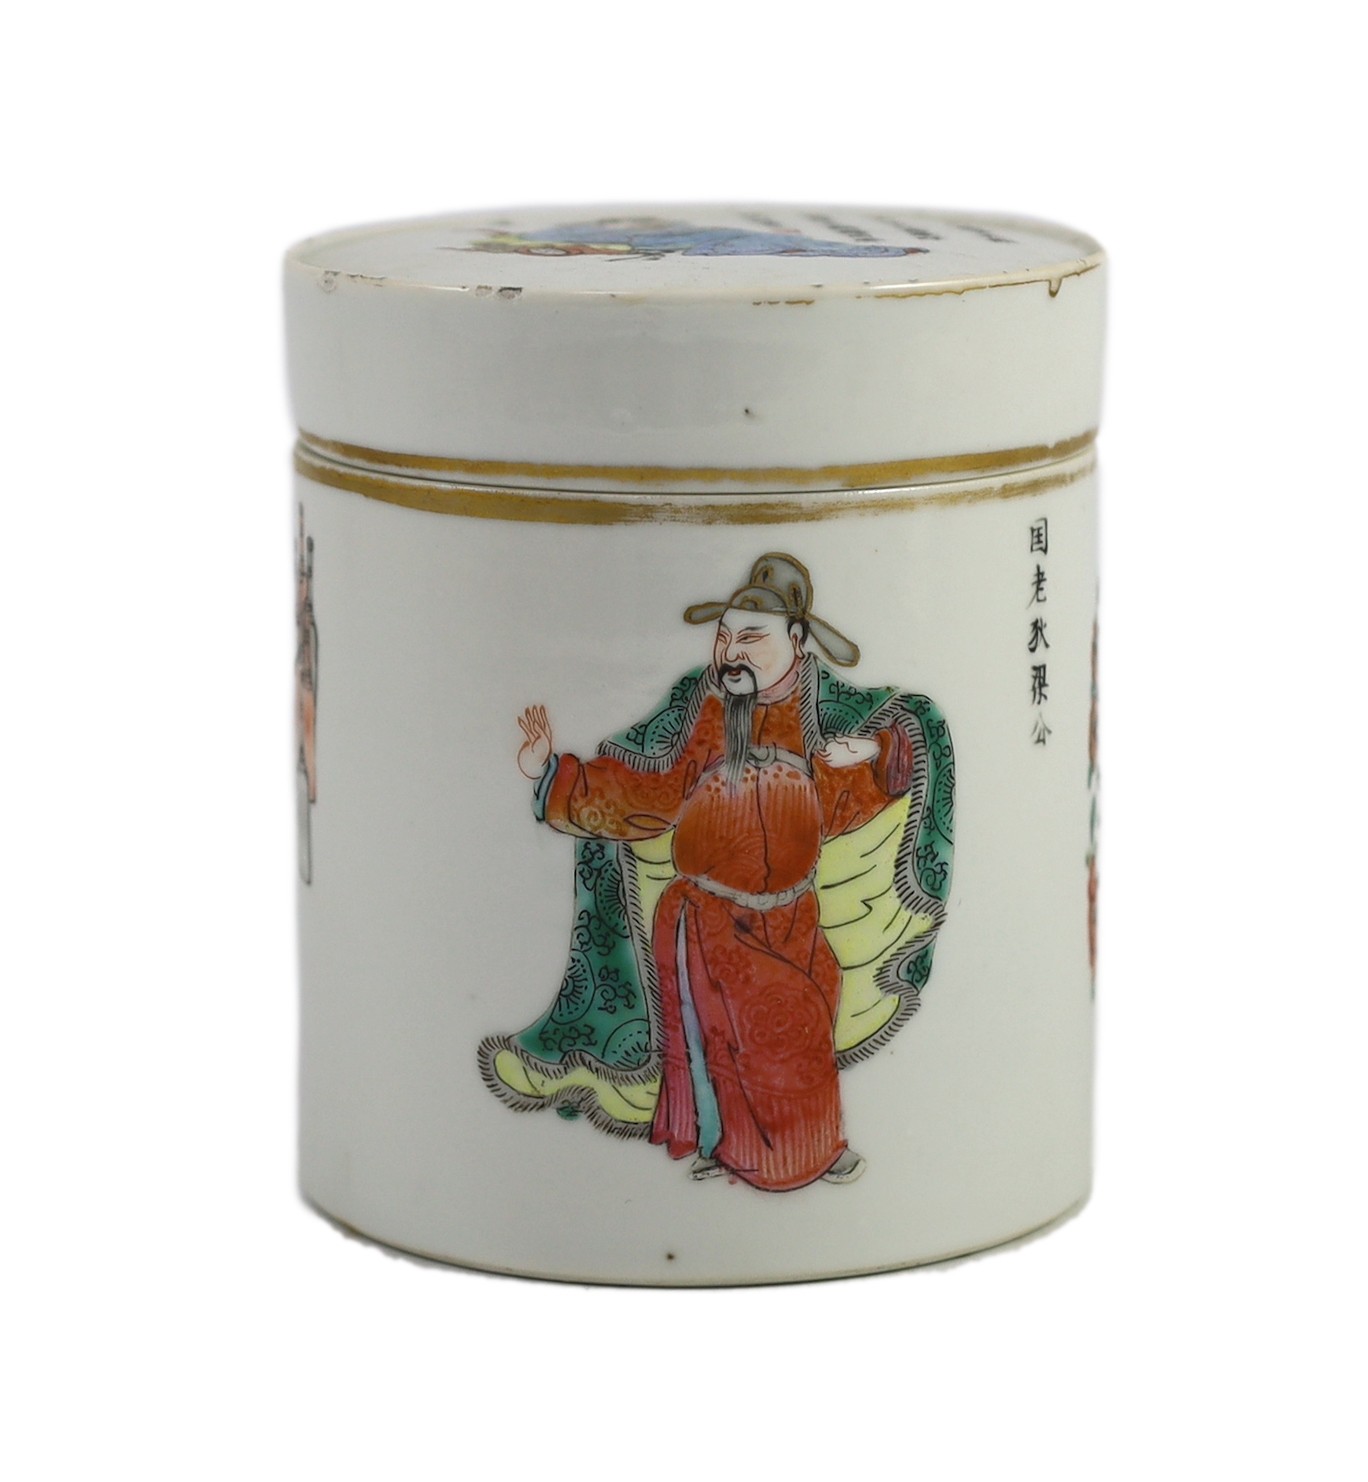 A Chinese famille rose fencai inscribed cylindrical jar and cover, mid 19th century, 11.2cm high                                                                                                                            